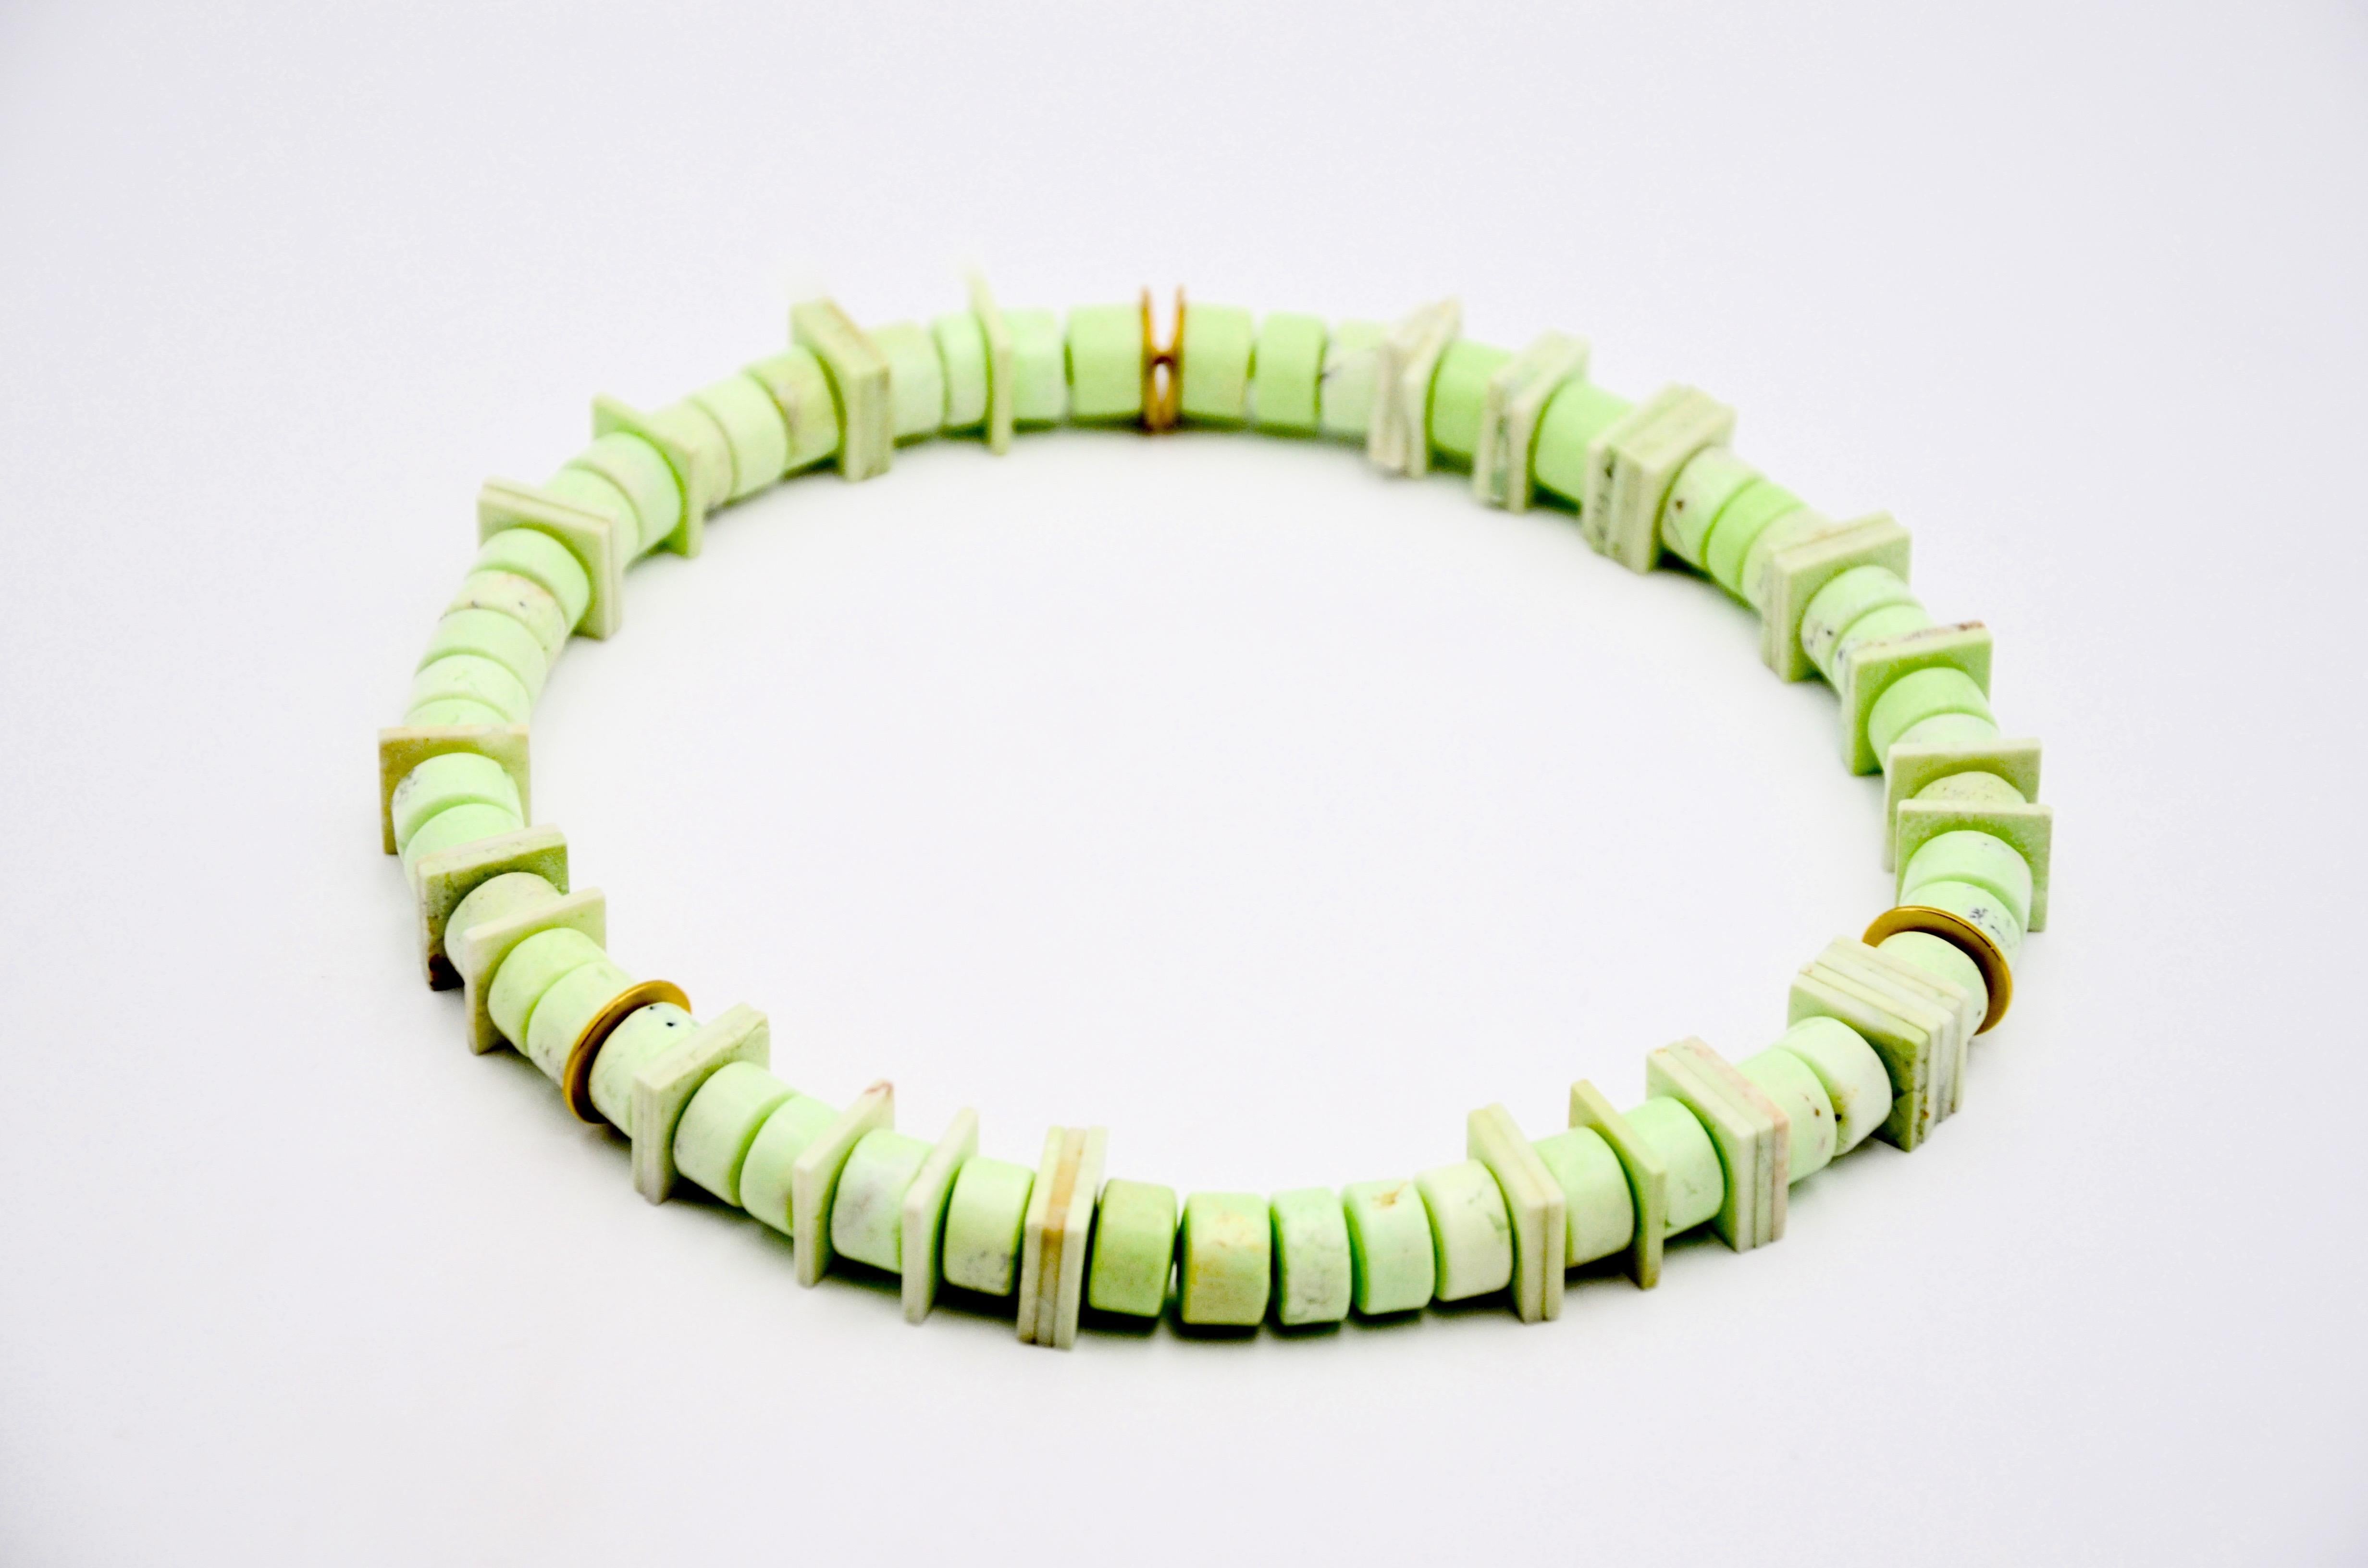 Contemporary 18 karat Yellow Gold Lemon Chrysoprase Colliers

Minimalist, modern, elegant - handcrafted in our atelier, designed by Arno Schneider.
A necklace with a colorful gemstone, a one-of-a- kind fine jewelry piece.